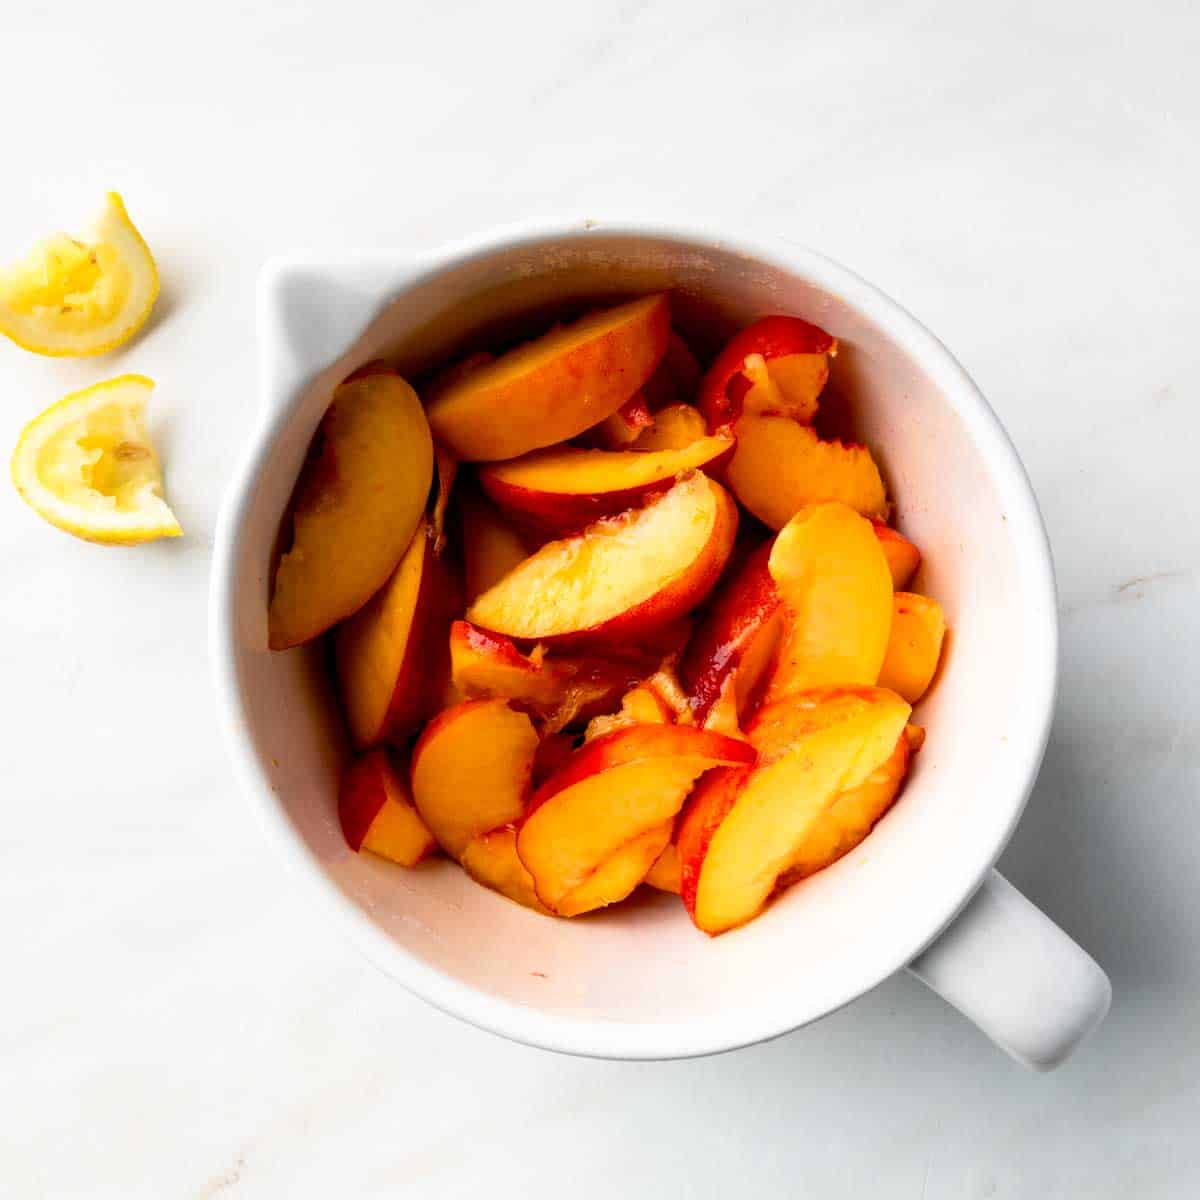 A bowl of sugared peach slices next to squeezed lemon wedges. 